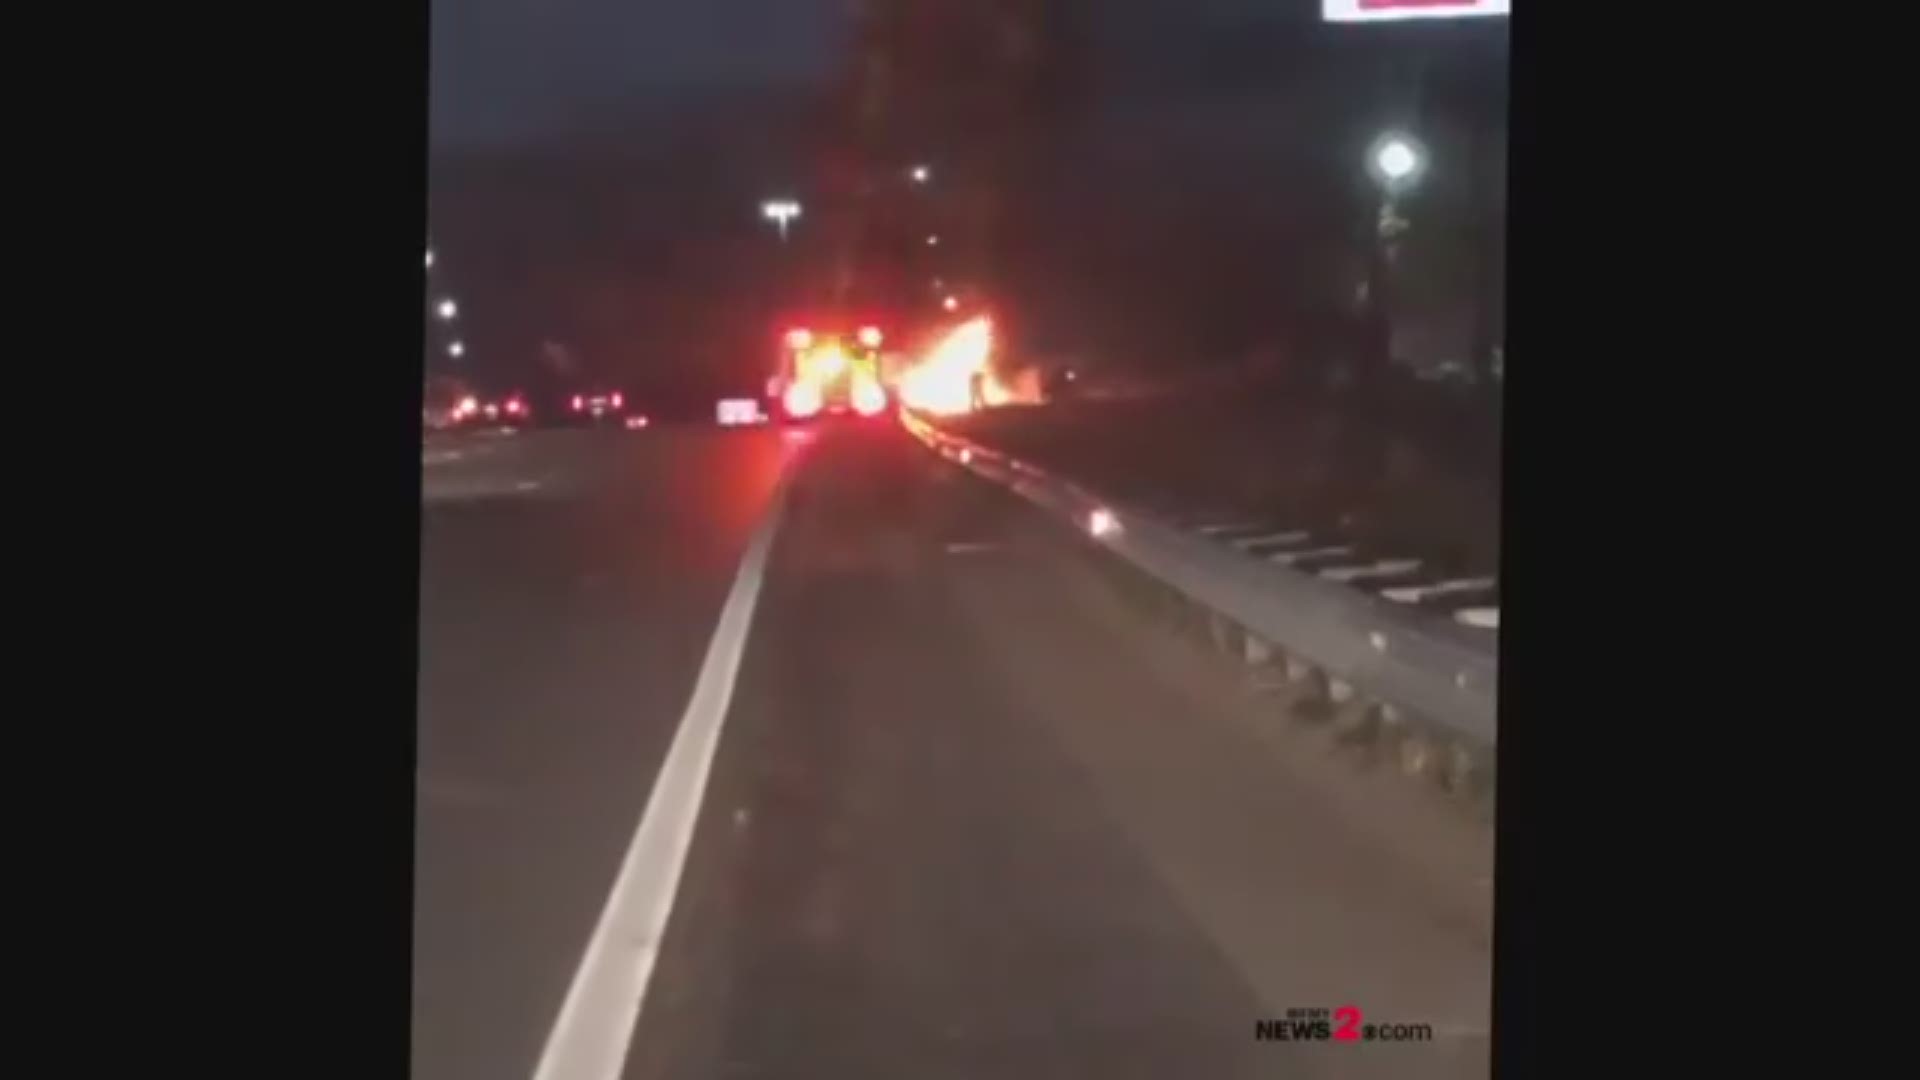 A car fire was captured on I-40 at exit 211 near Gallimore Dairy Road Friday night. The fire caused traffic to slow in the area.